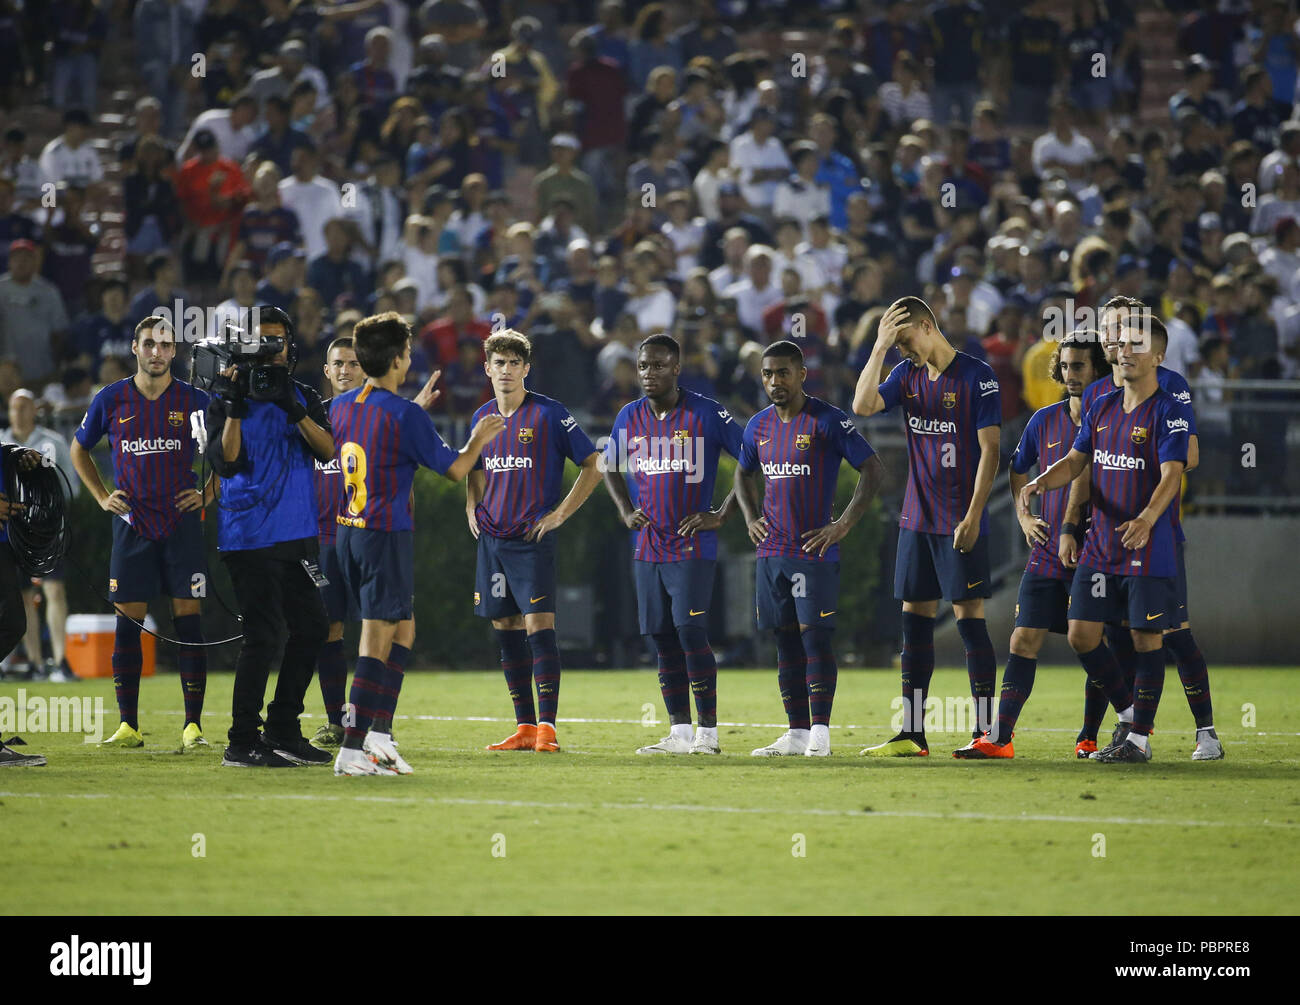 Los Angeles, California, USA. 28th July, 2018. FC Barcelona's players line up for the penalty shootout against Tottenham Hotspur during the International Champions Cup match on 28, 2018 in Pasadena, California.